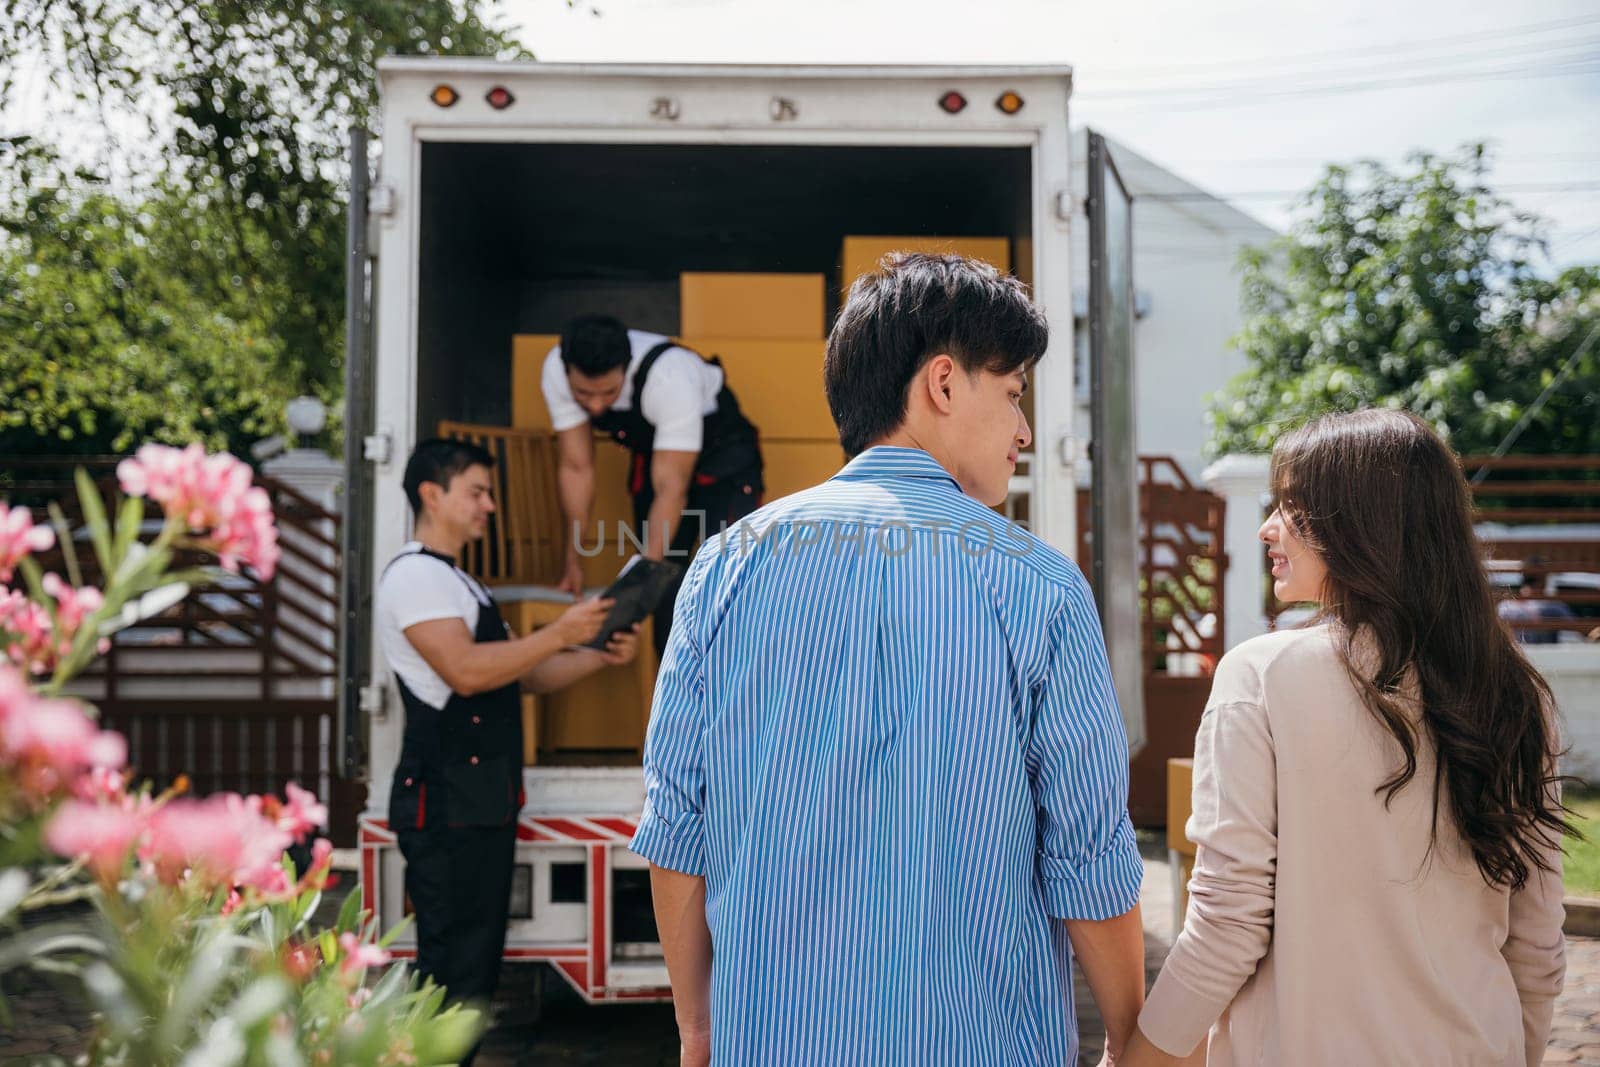 Assisted by a professional delivery team a couple transitions to their new home. Together they unload and lift cardboard boxes ensuring an organized and efficient move. Moving Day Concept by Sorapop